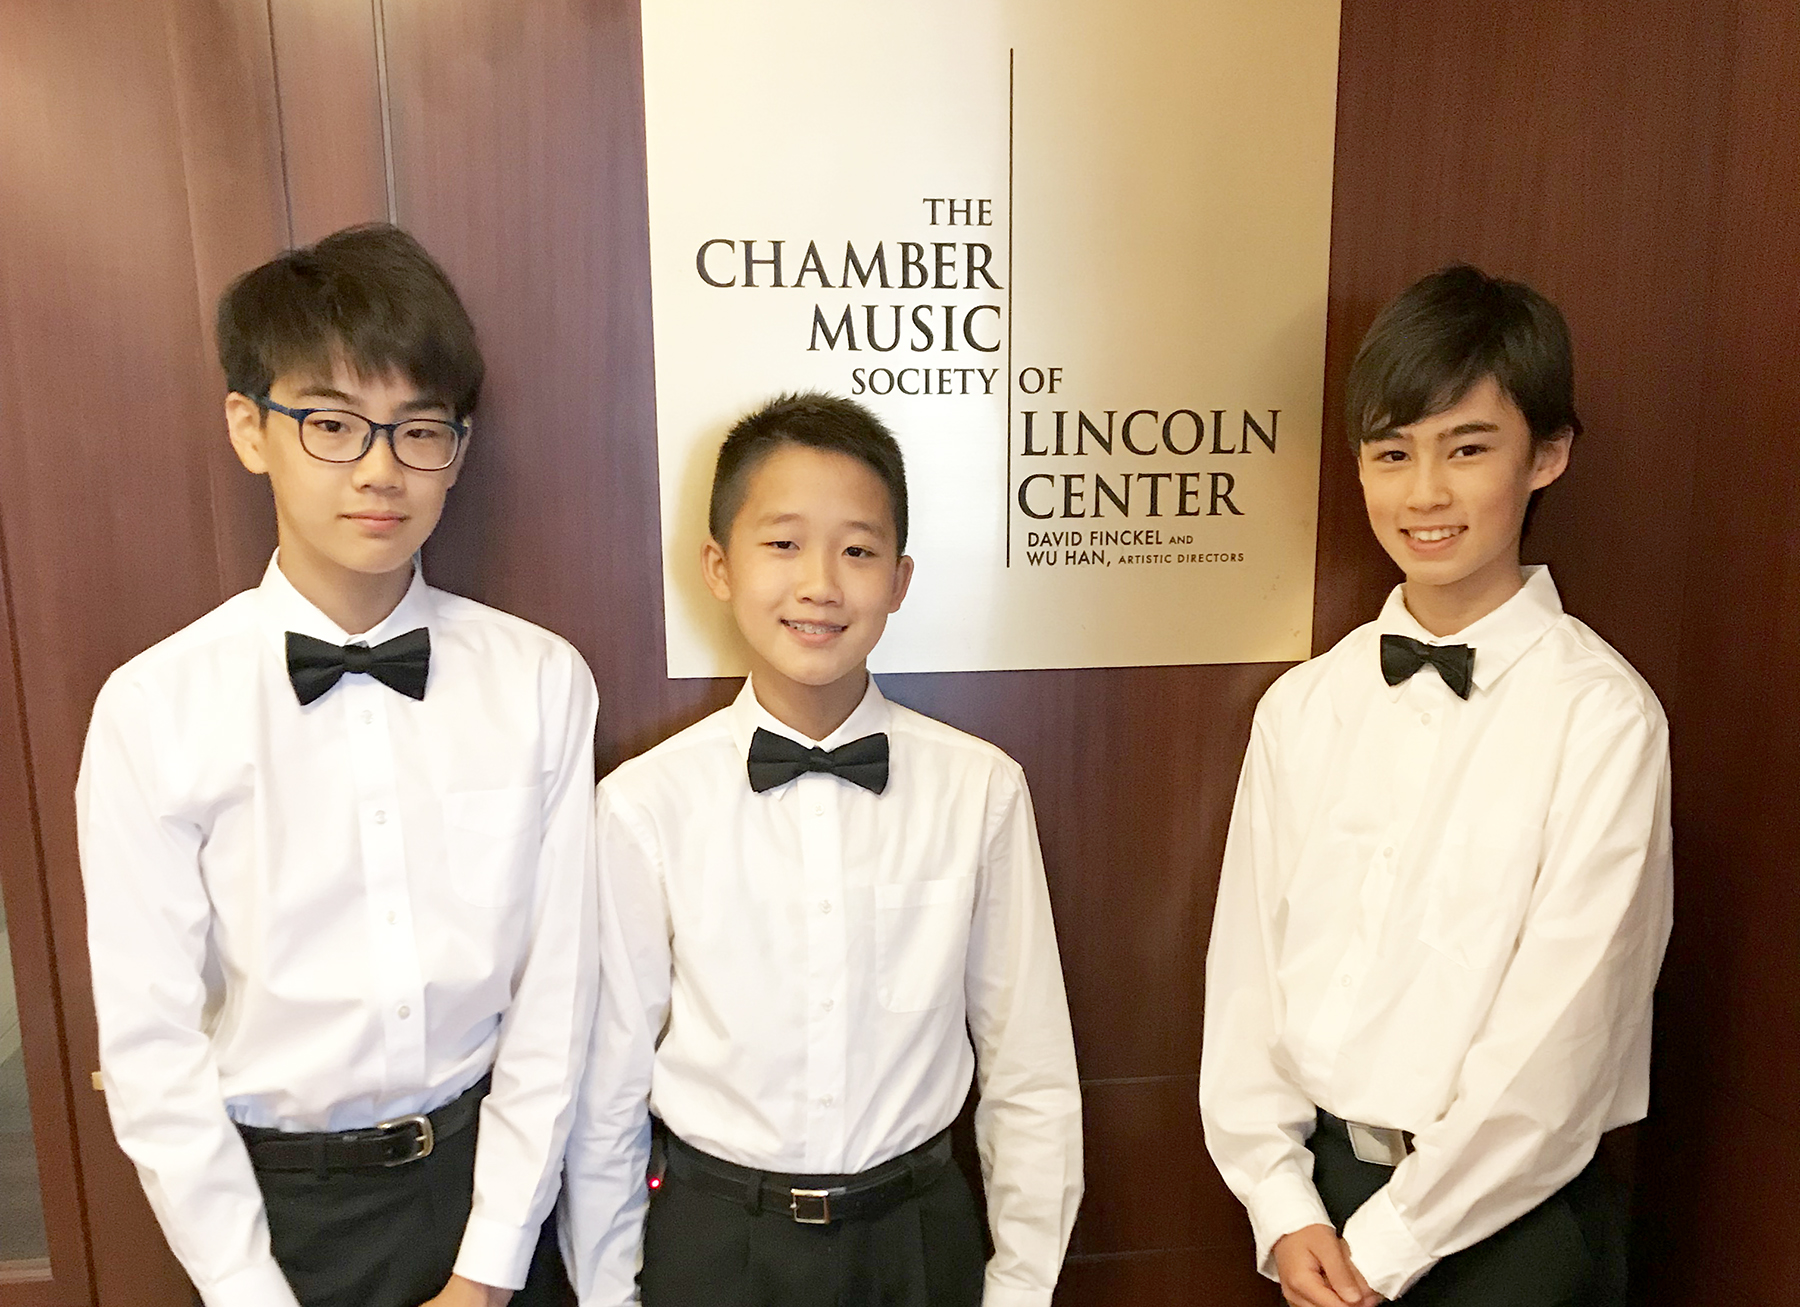 Three musicians from Great Neck South Middle School performed at the Lincoln Center. (Photo courtesy of the Great Neck Public Schools)